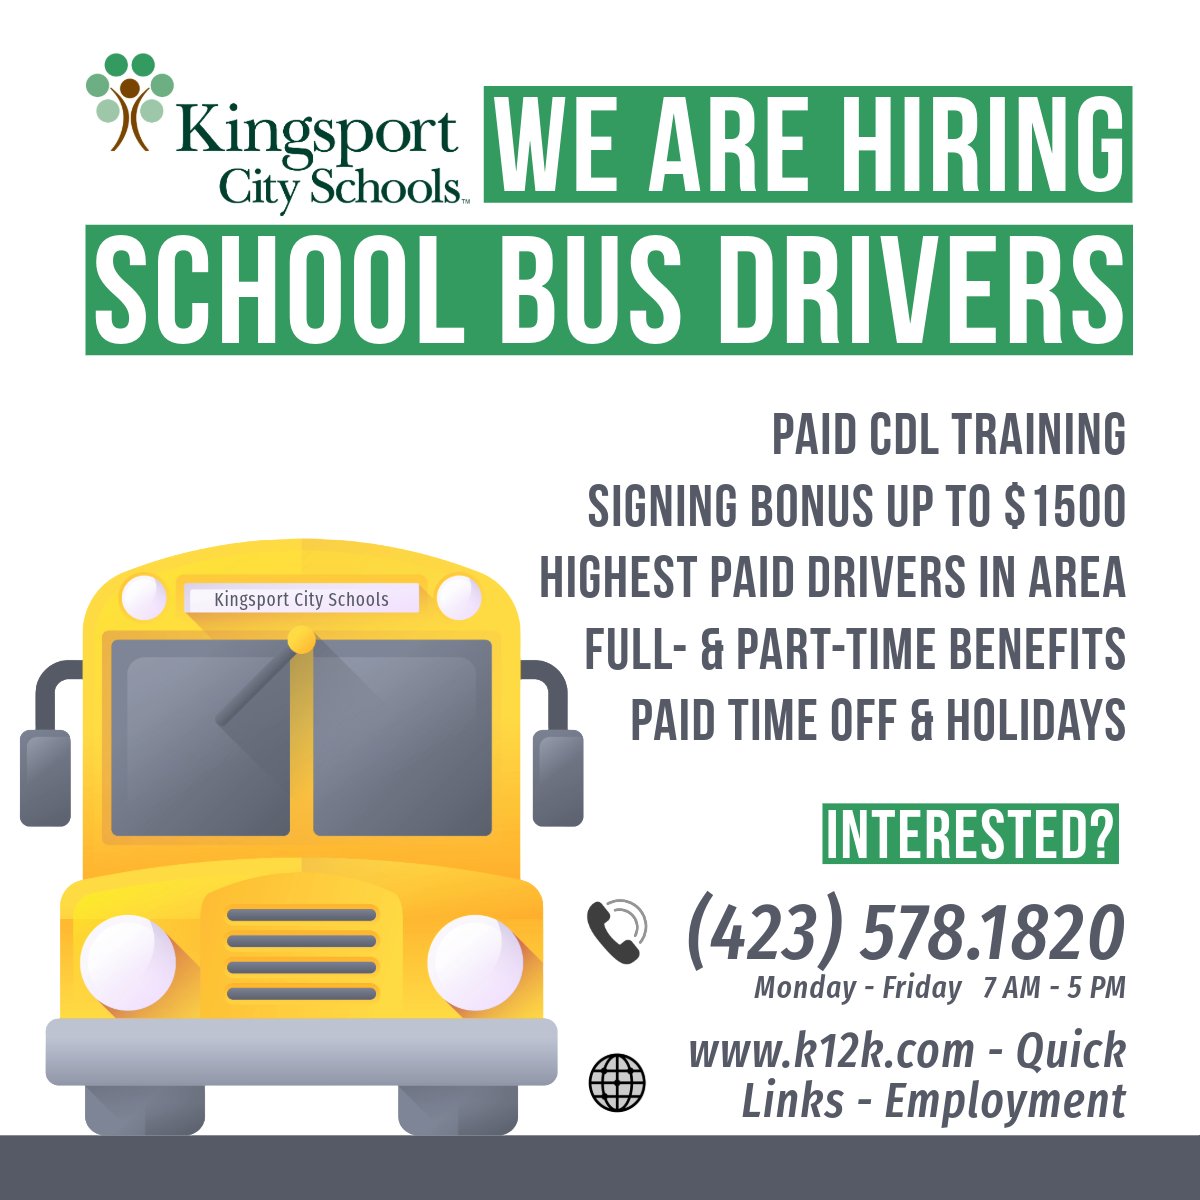 Love being around children & need a full- or part-time position? 🧐 If so, we'll pay you to learn to drive a school bus! 🚌⭐ 🚌Paid CDL & training 🚌Signing Bonus 🚌Highest wage in area 🚌Opp. for Benefits & PTO 🚌Summers Off 🚌Holidays Call us at (423) 578.1820!